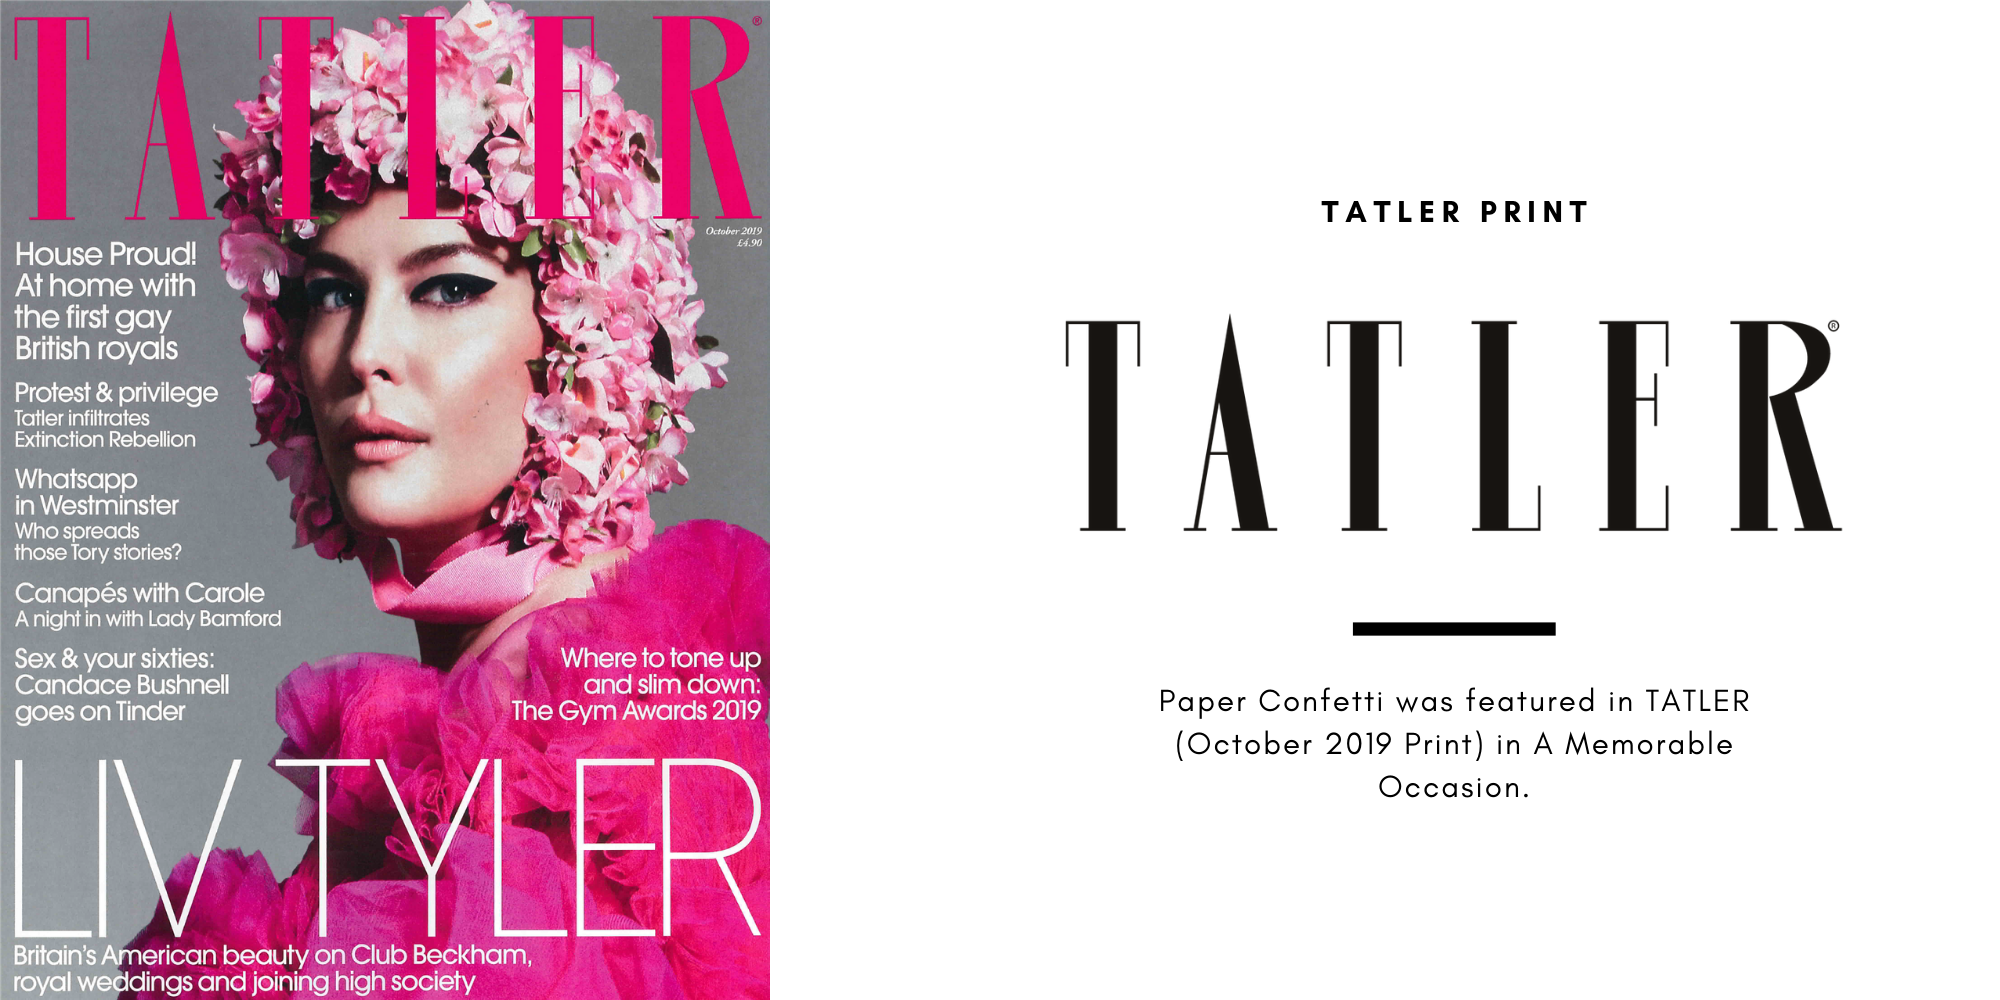 Paper Confetti was featured in Tatler Magazine's "A Memorable Occasion" October 2019 Print for our exclusive customizable rose gold champagne bottle balloons. 